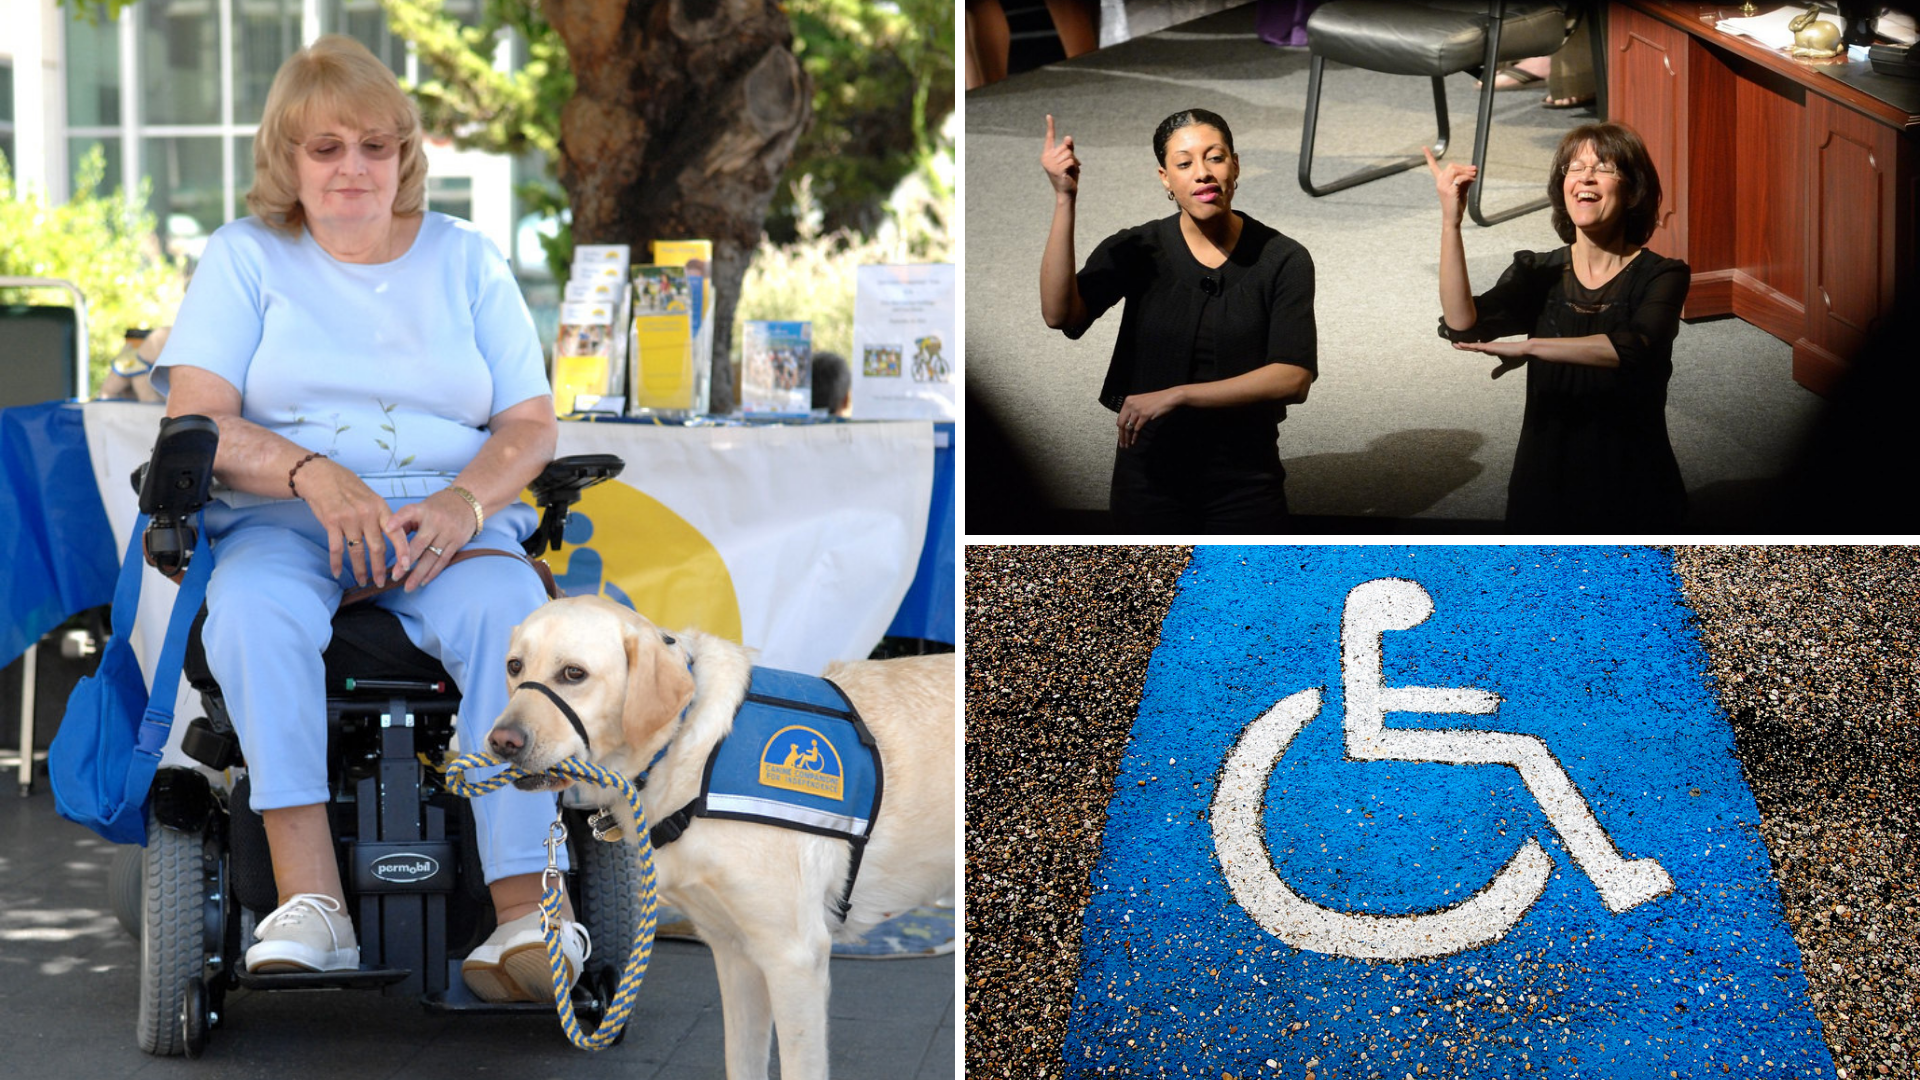 Woman in a wheelchair with a guide dog, two sign language interpreters signing, and a disability parking space